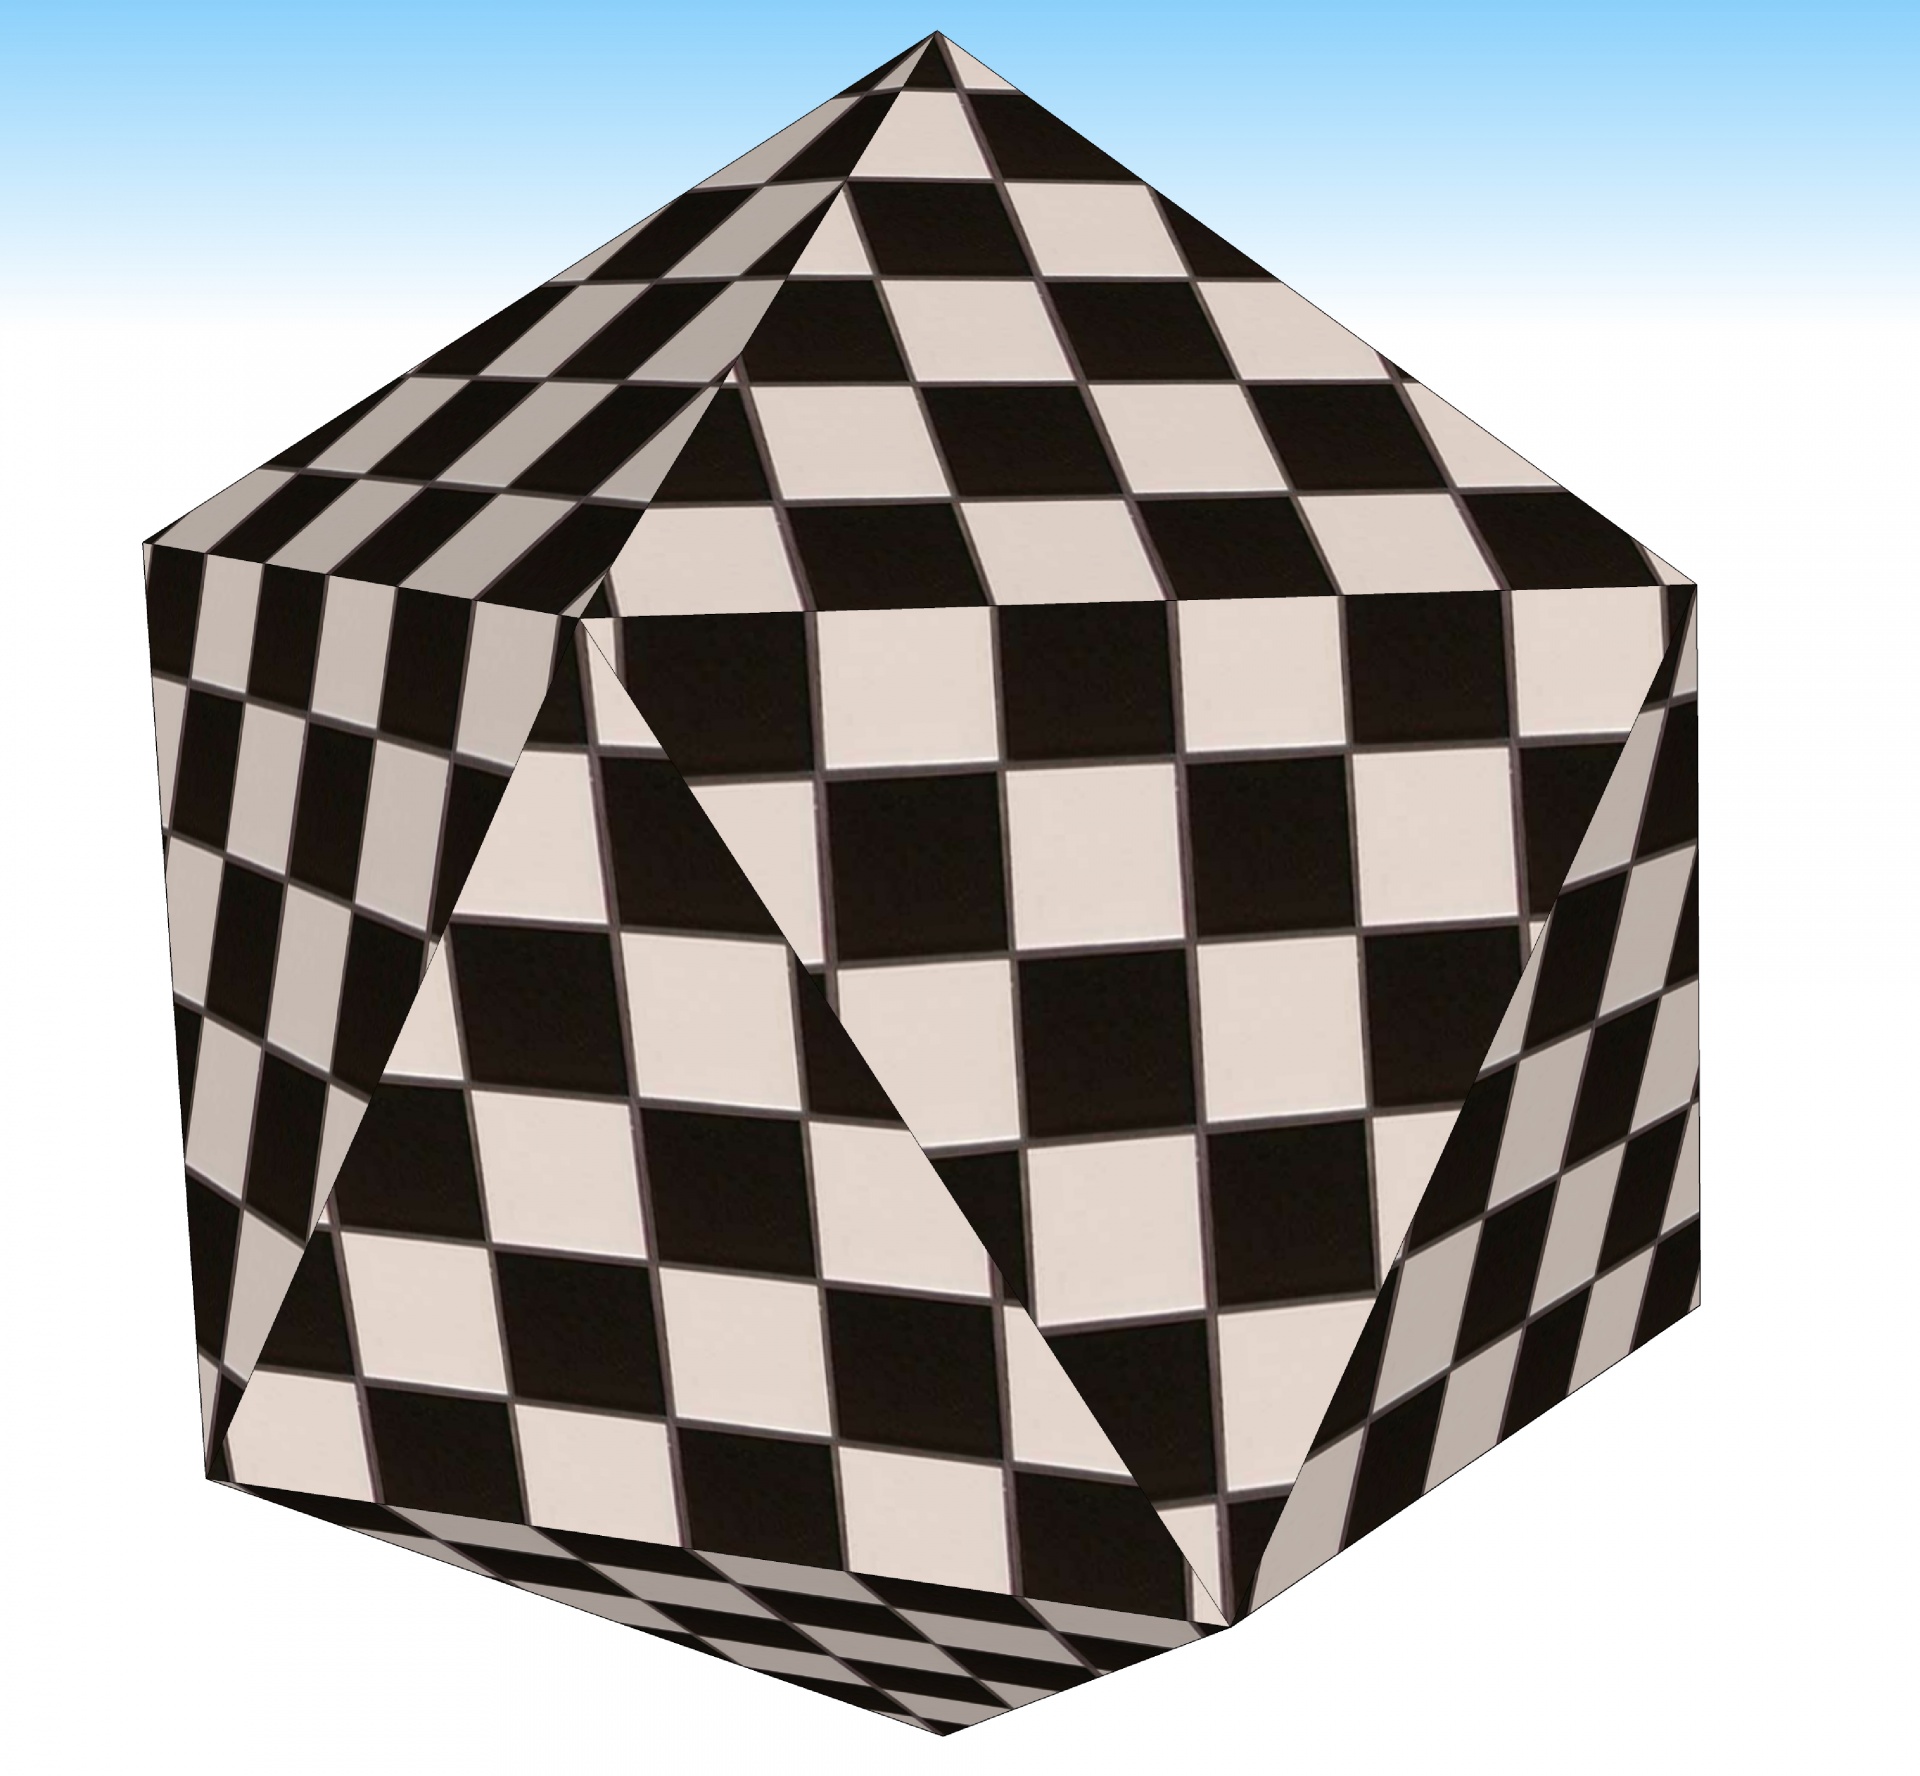 drawing of a 3d diamond with checkerboard pattern on white